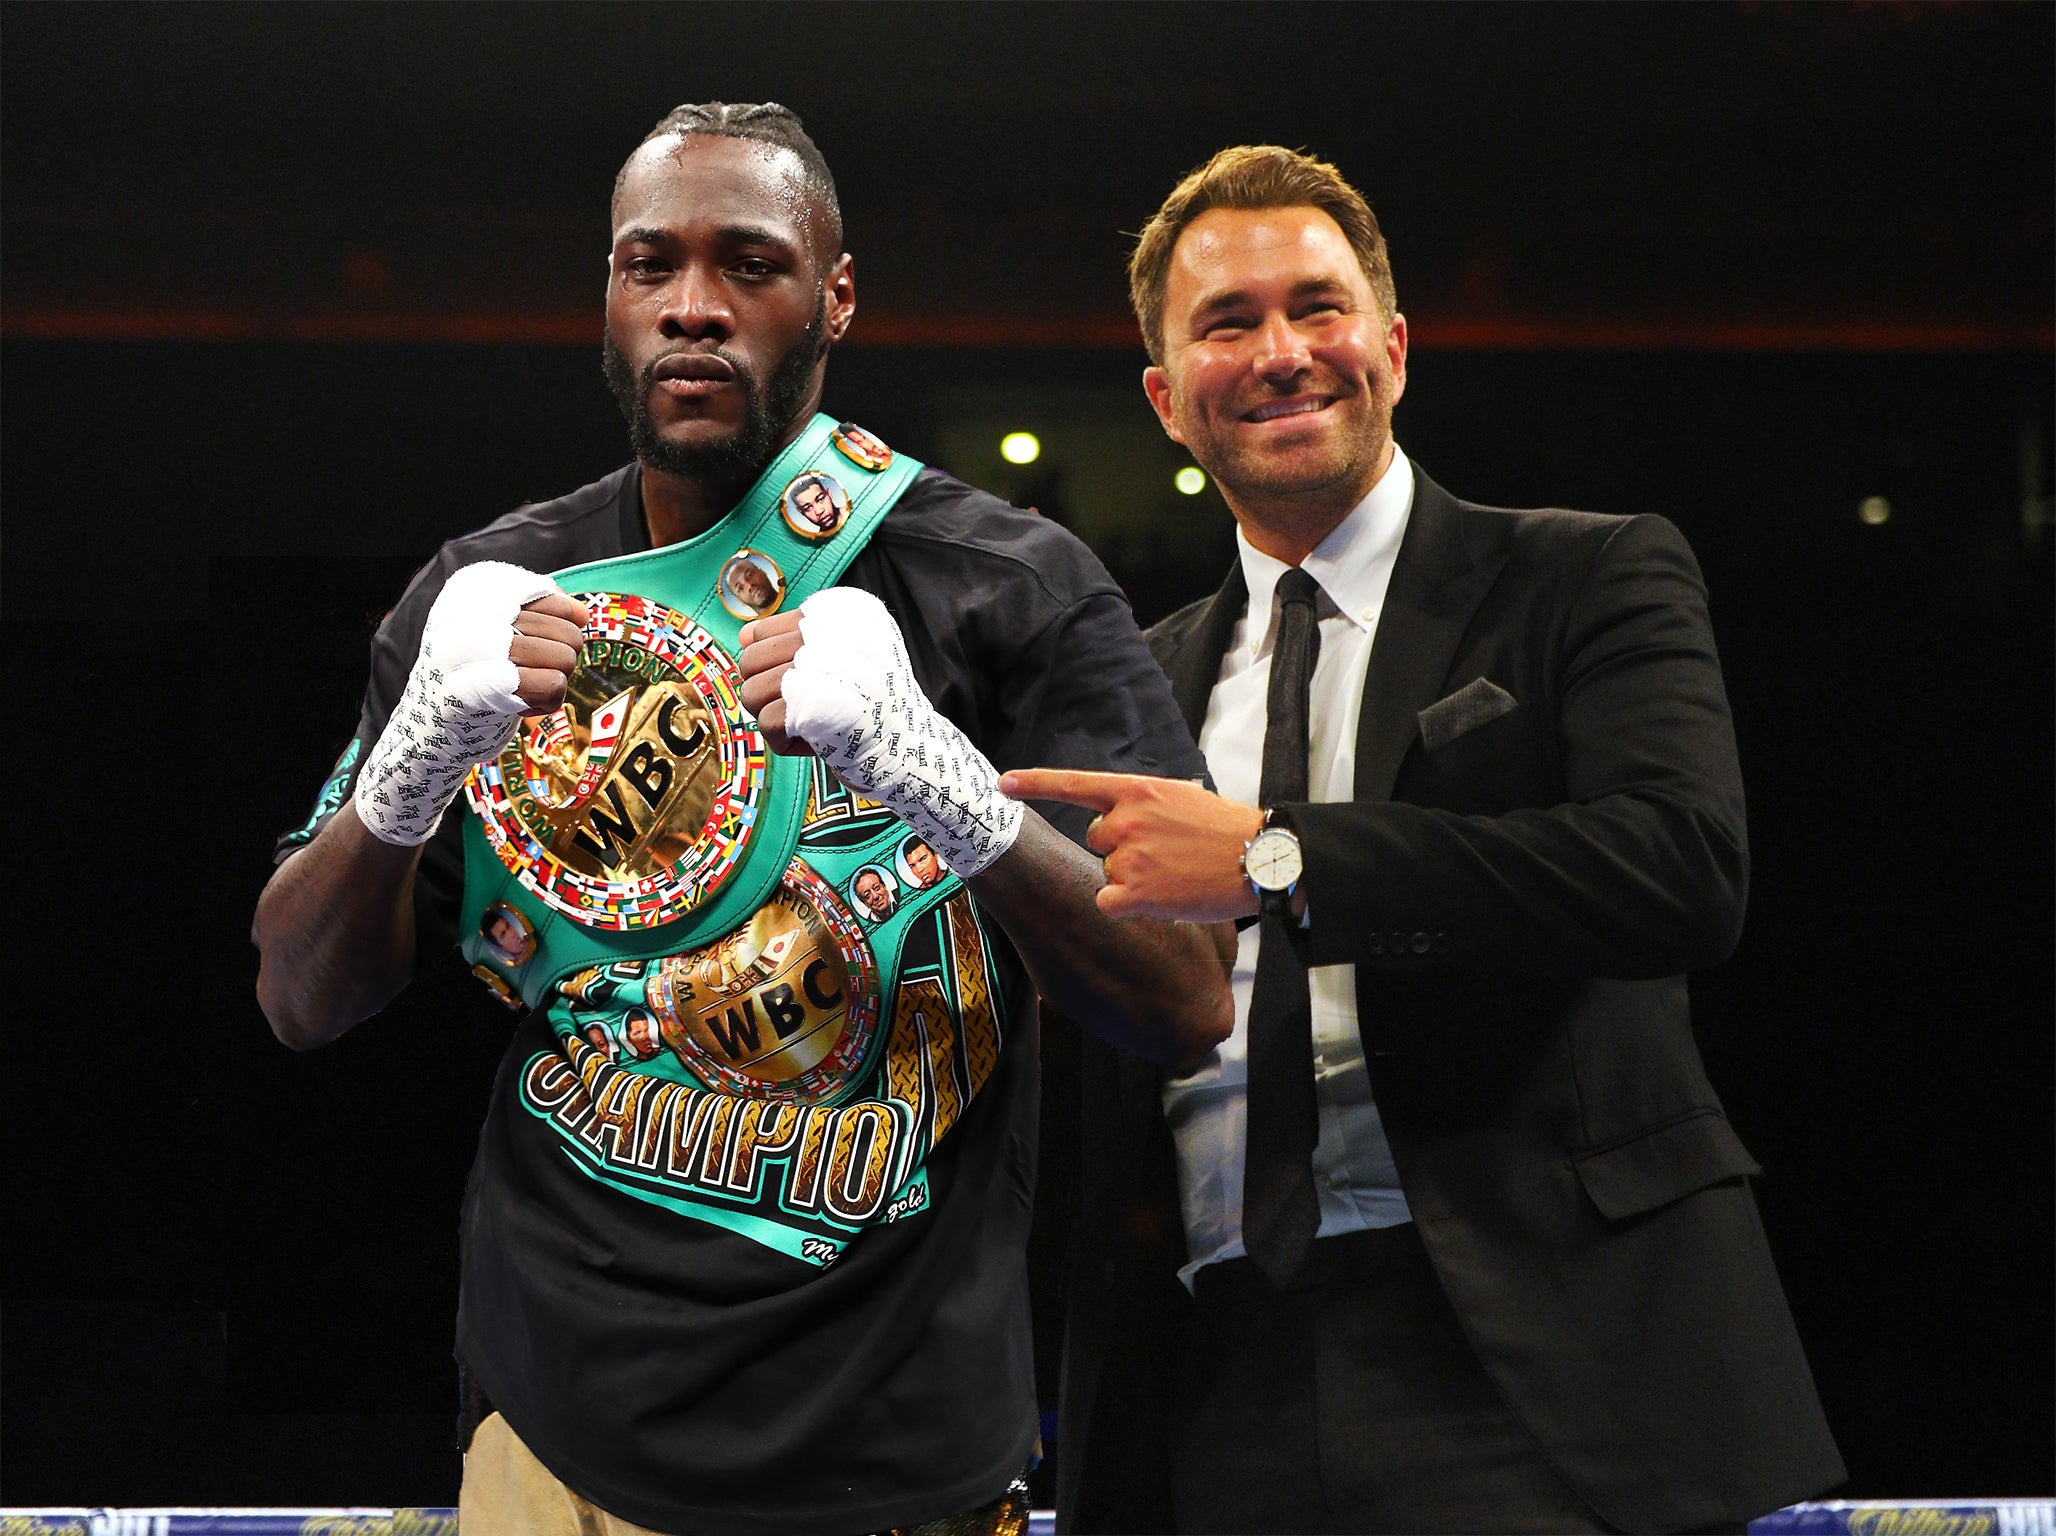 What could be: Deontay Wilder and Eddie Hearn